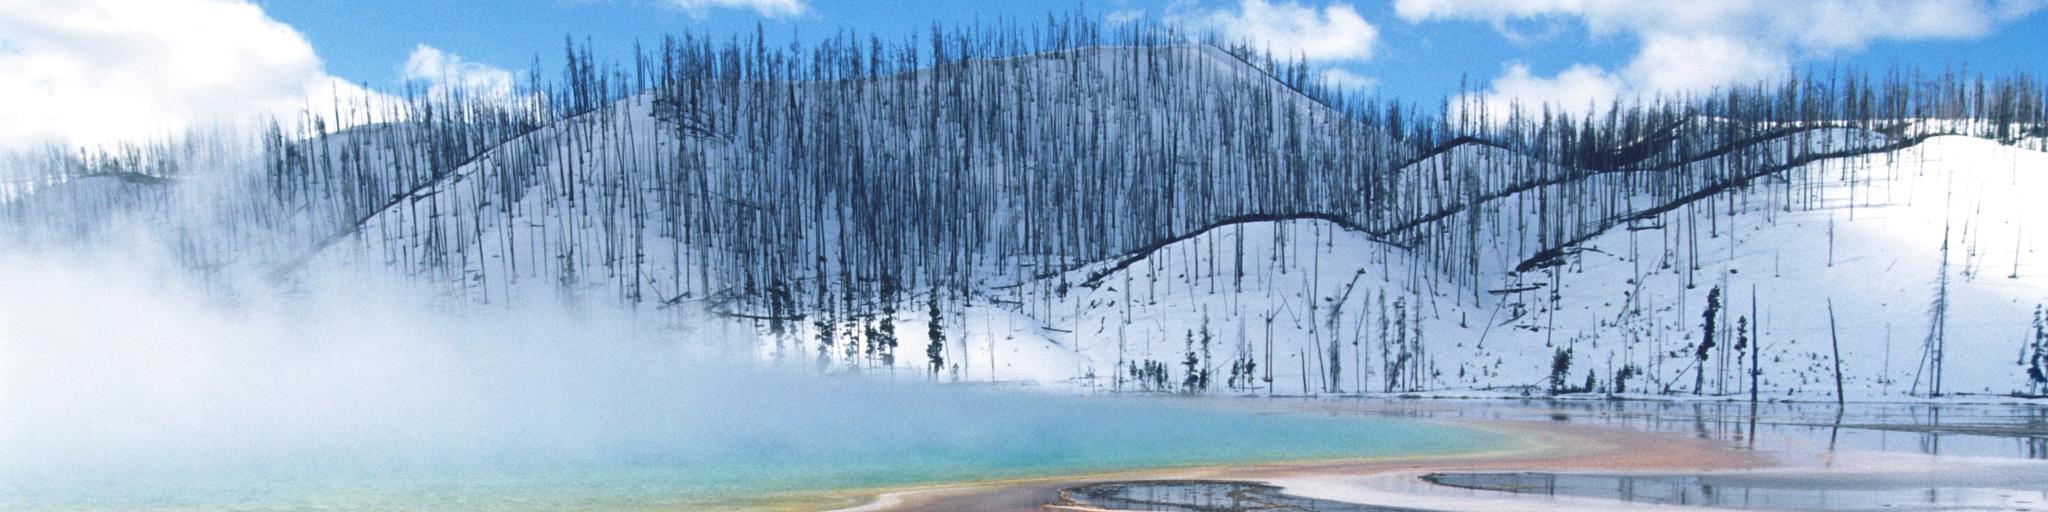 Yellowstone National Park, Grand Prismatic Spring, mist over hot spring in winter landscape